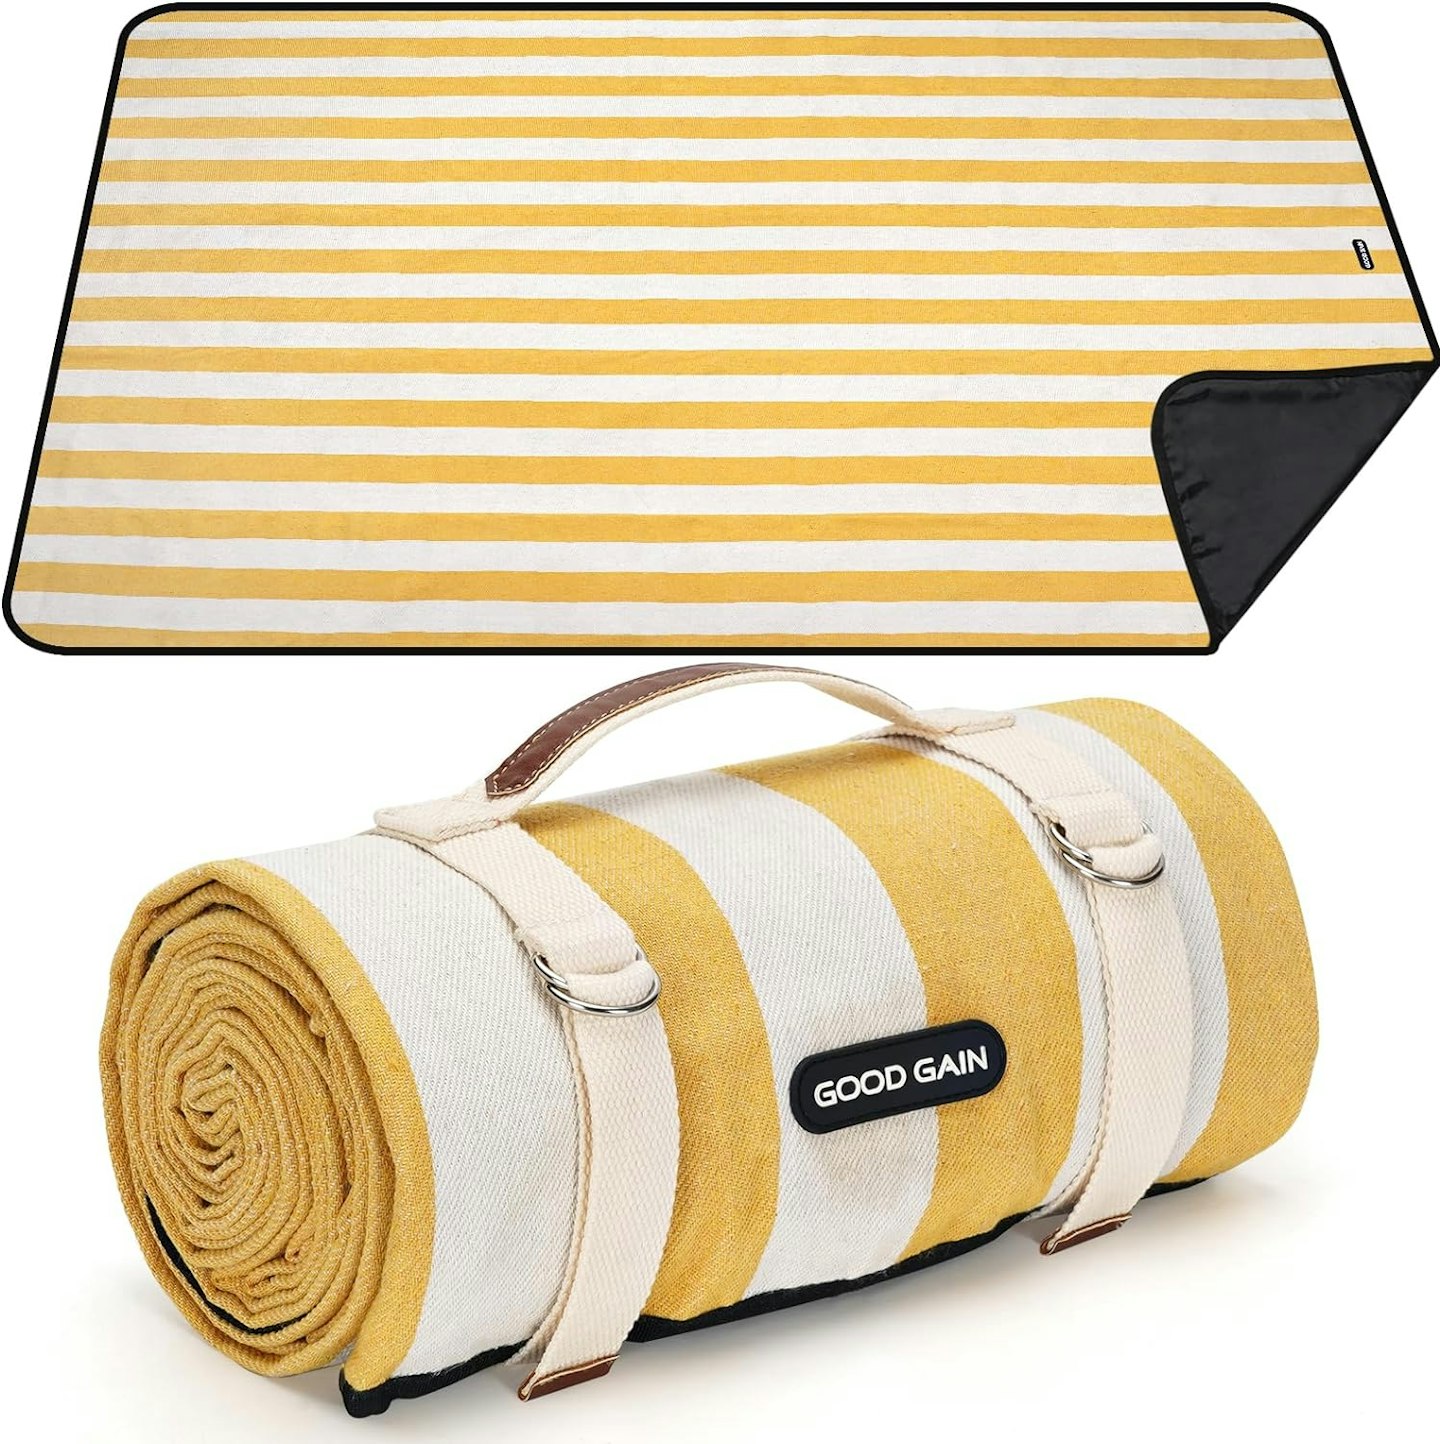 Yellow and white striped picnic blanket 